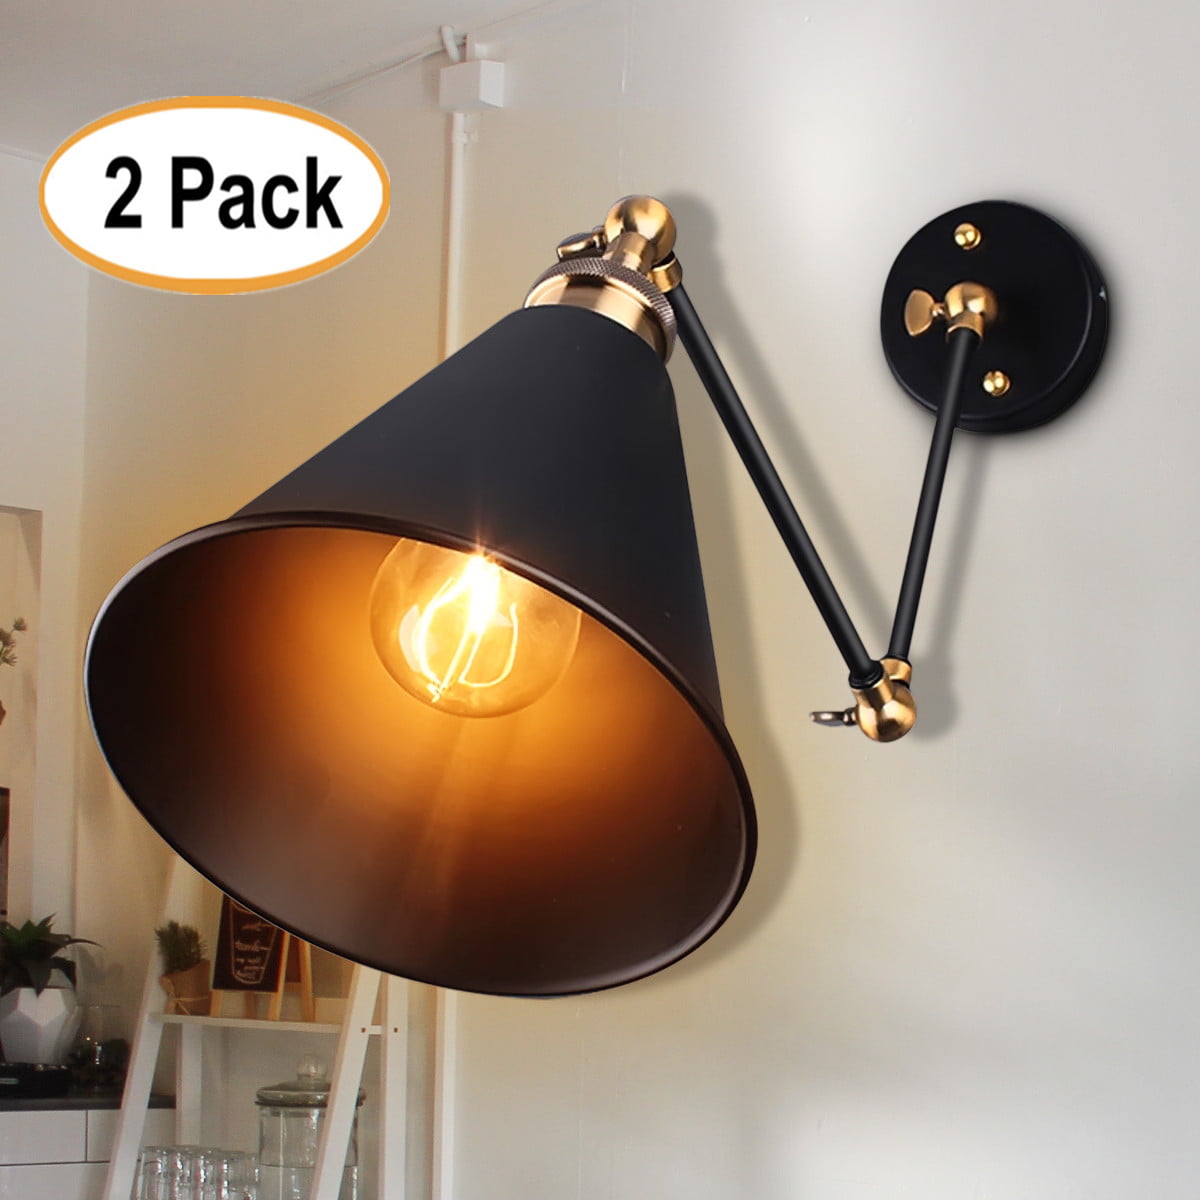 2x Industrial Vintage Adjustable Swing Arm Light Sconce Wall Lamp Fixture Home 